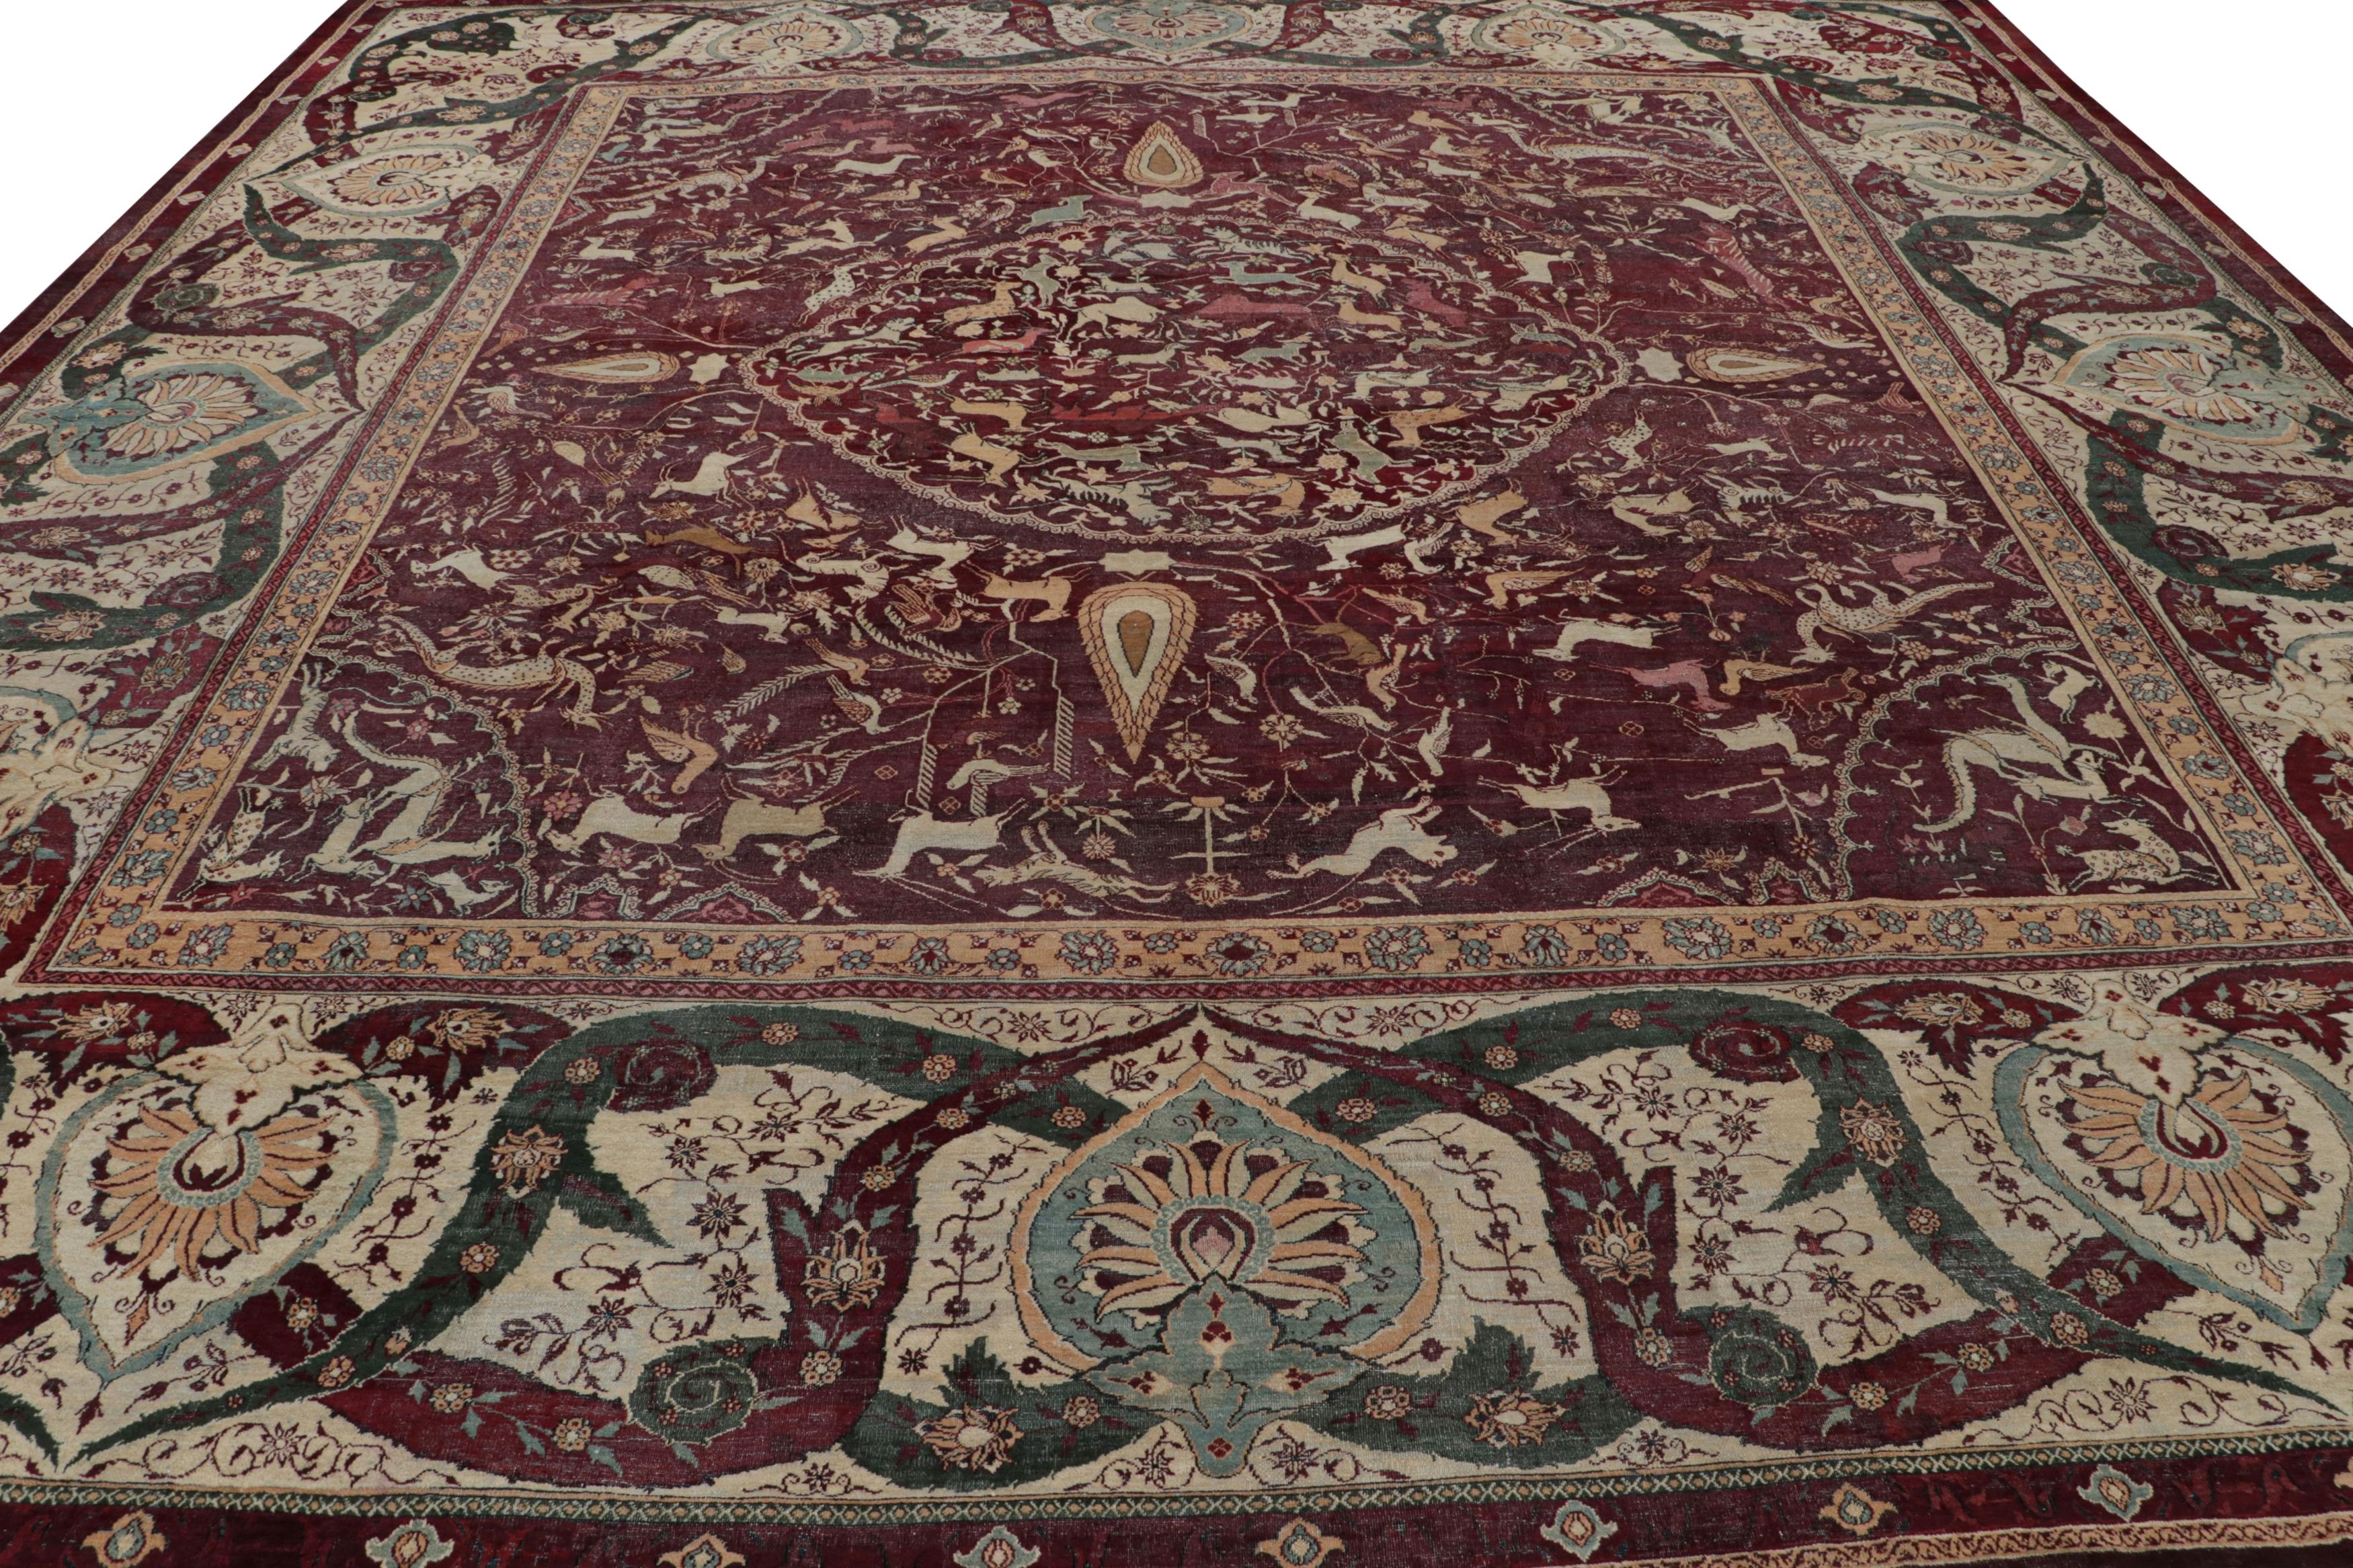 Hand-Knotted Antique Agra Square Rug in Red and Beige Brown Pictorial Patterns For Sale